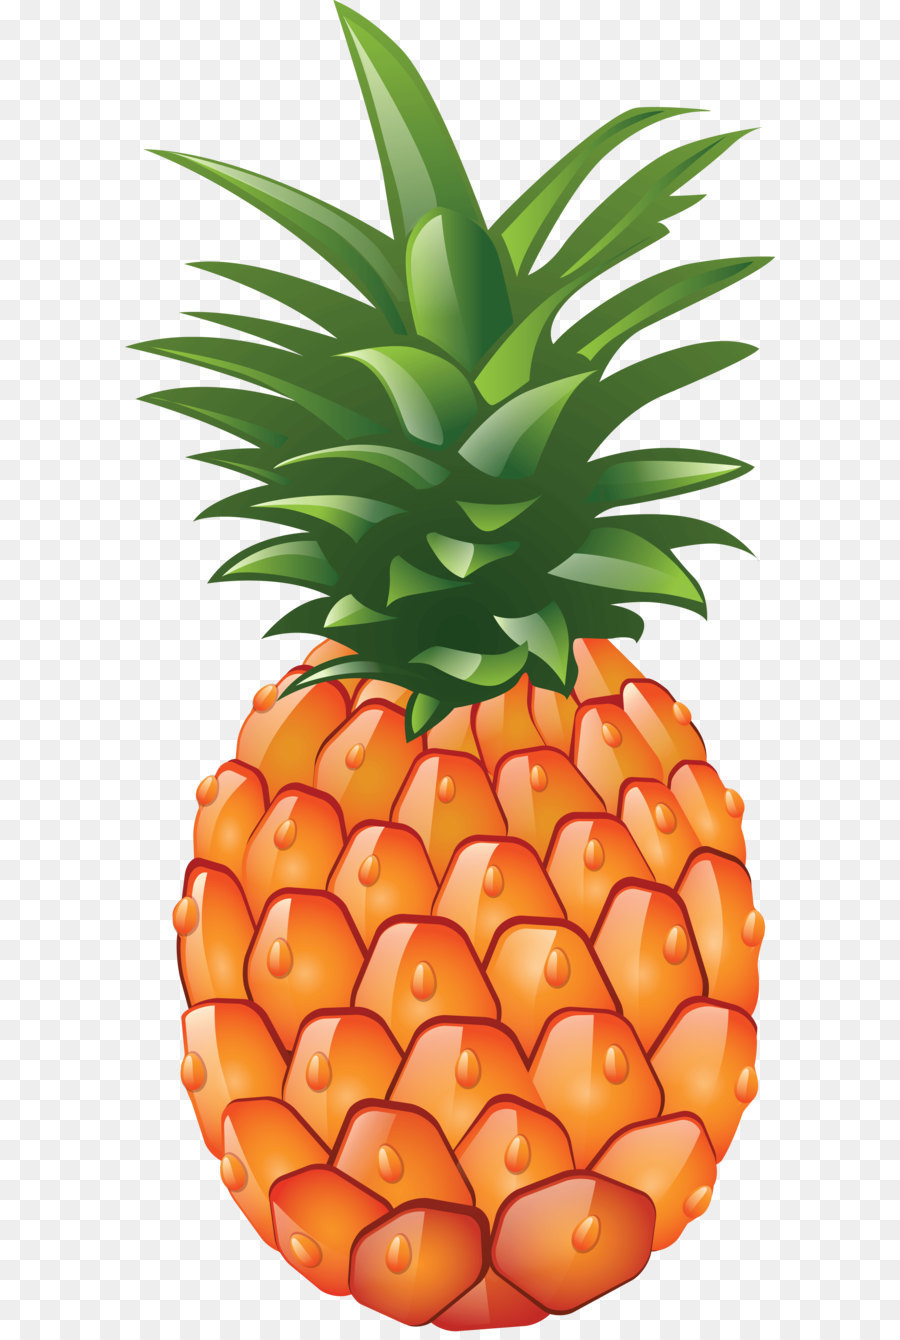 Pineapple Clip art - Pineapple Png Image Download png download - 2661*5455 - Free Transparent Pineapple png Download.